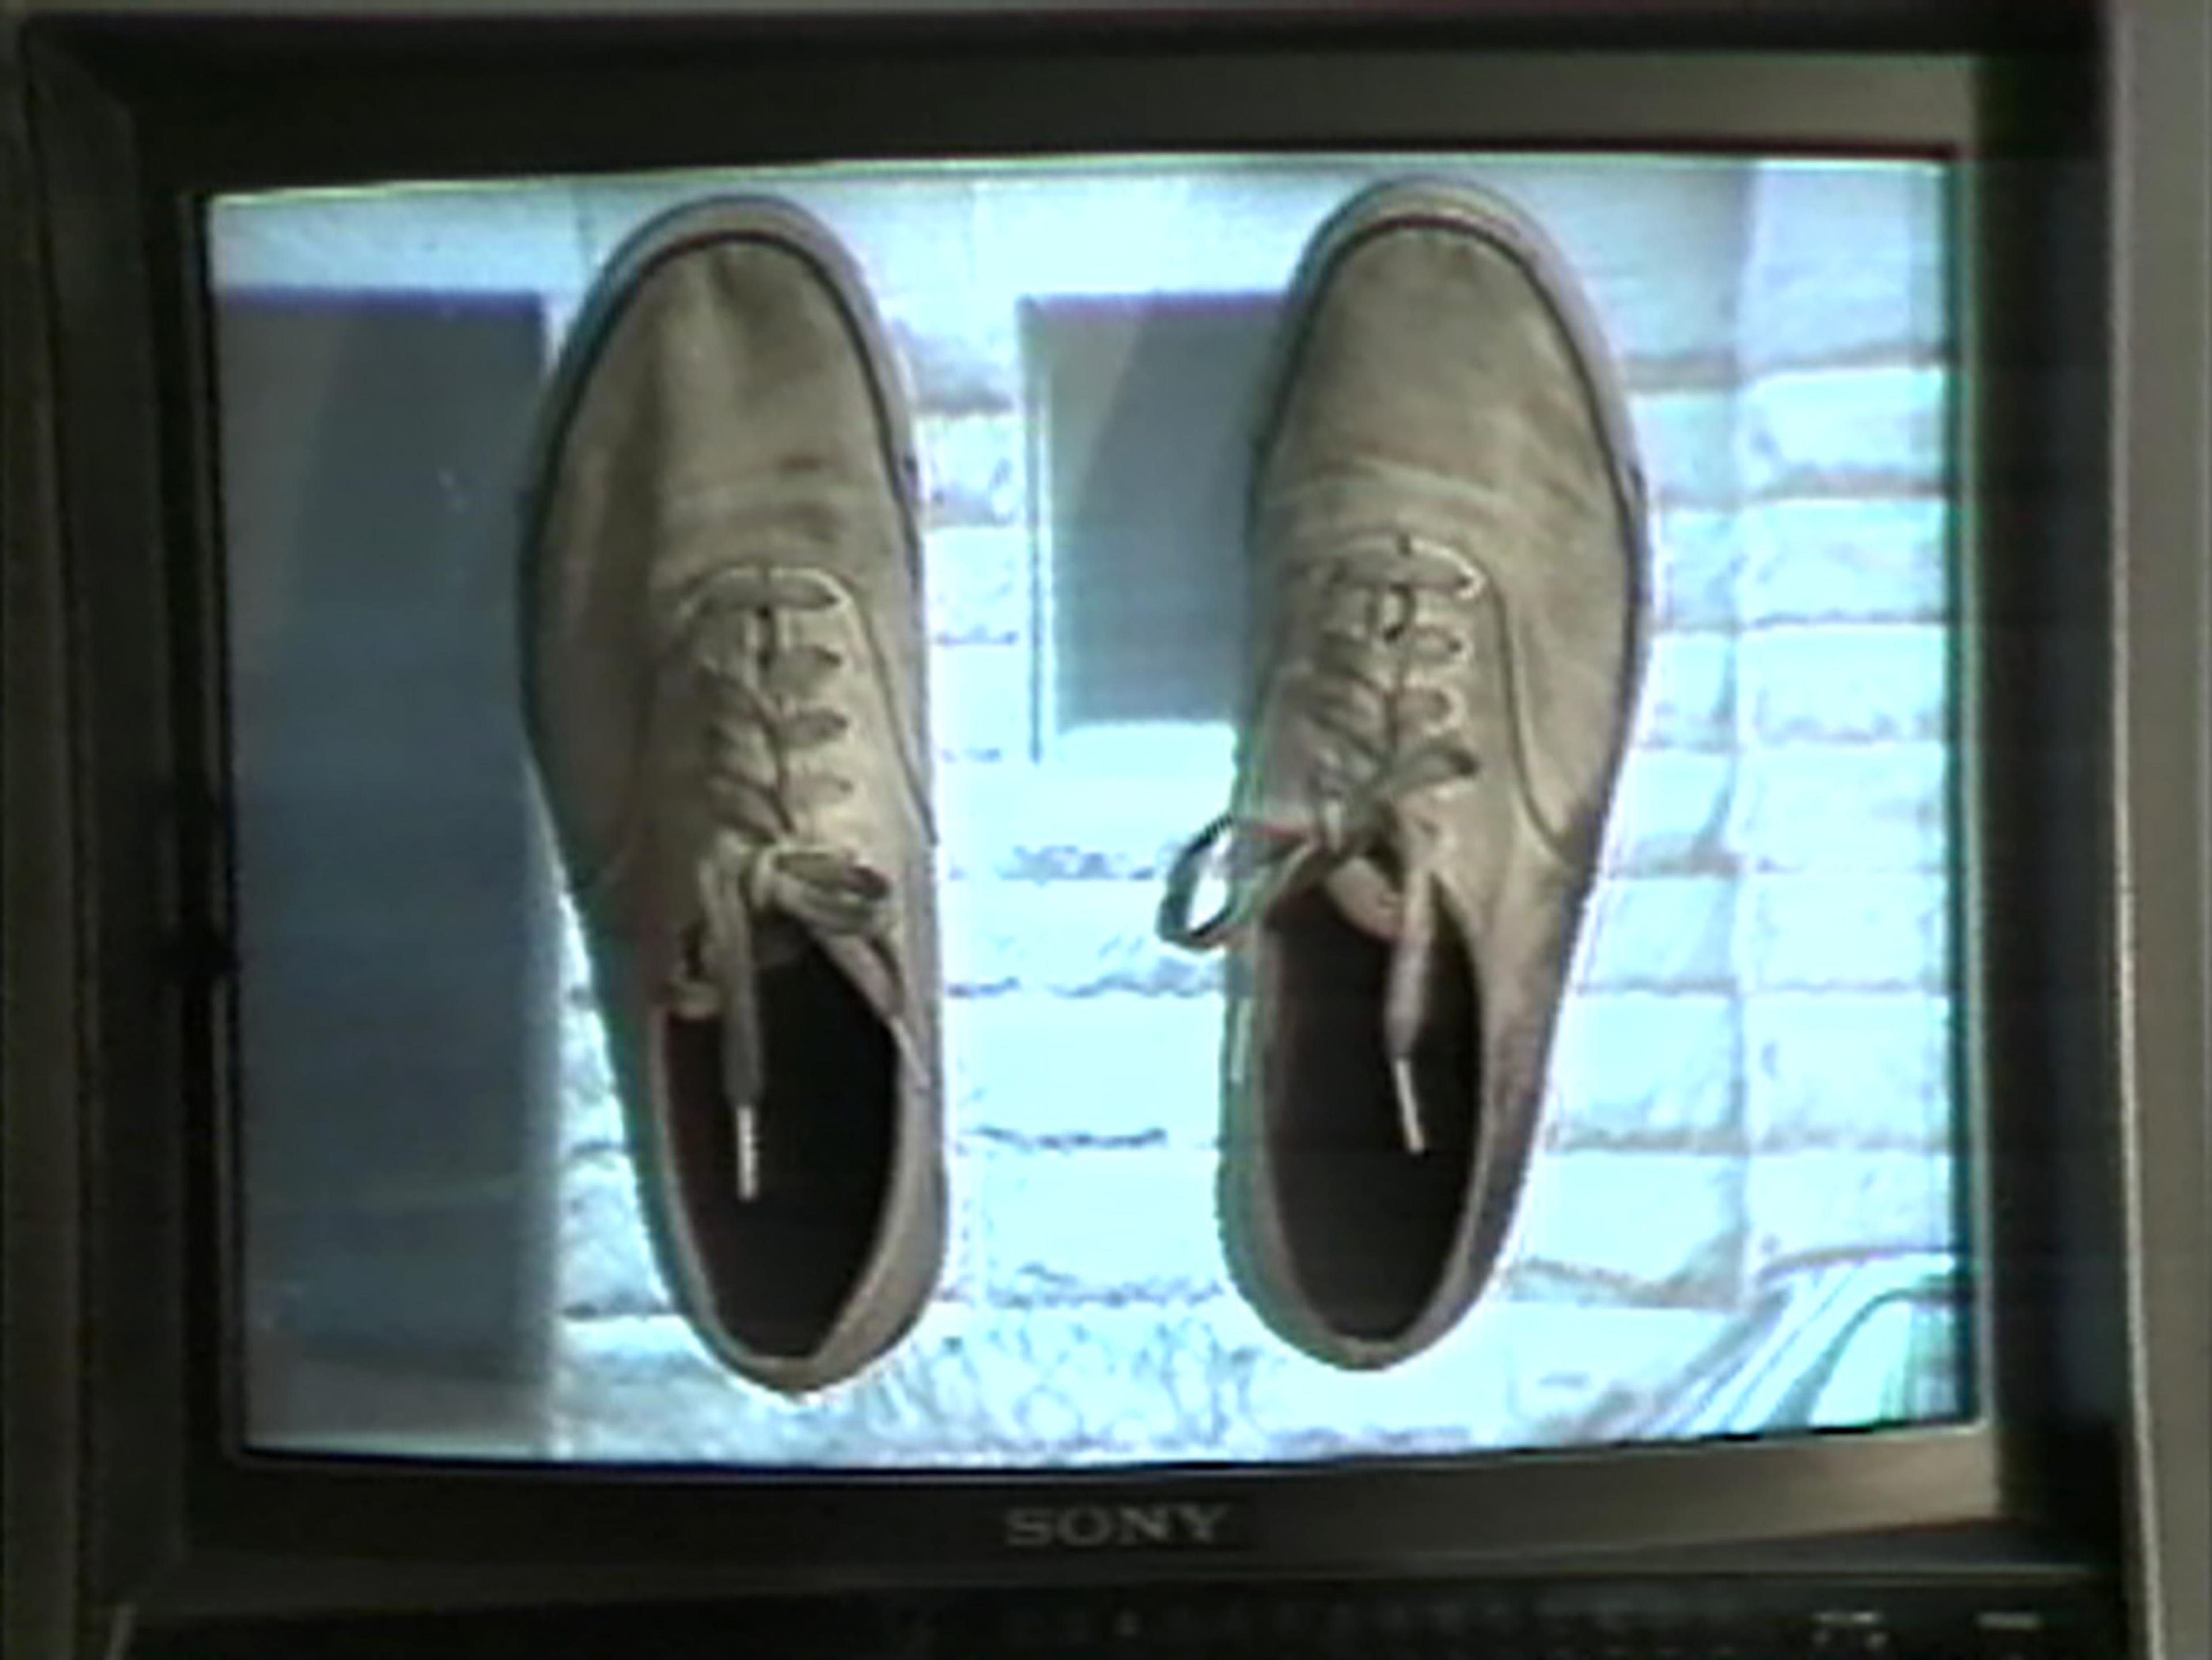 Still from Video walk showing pair of old sneakers